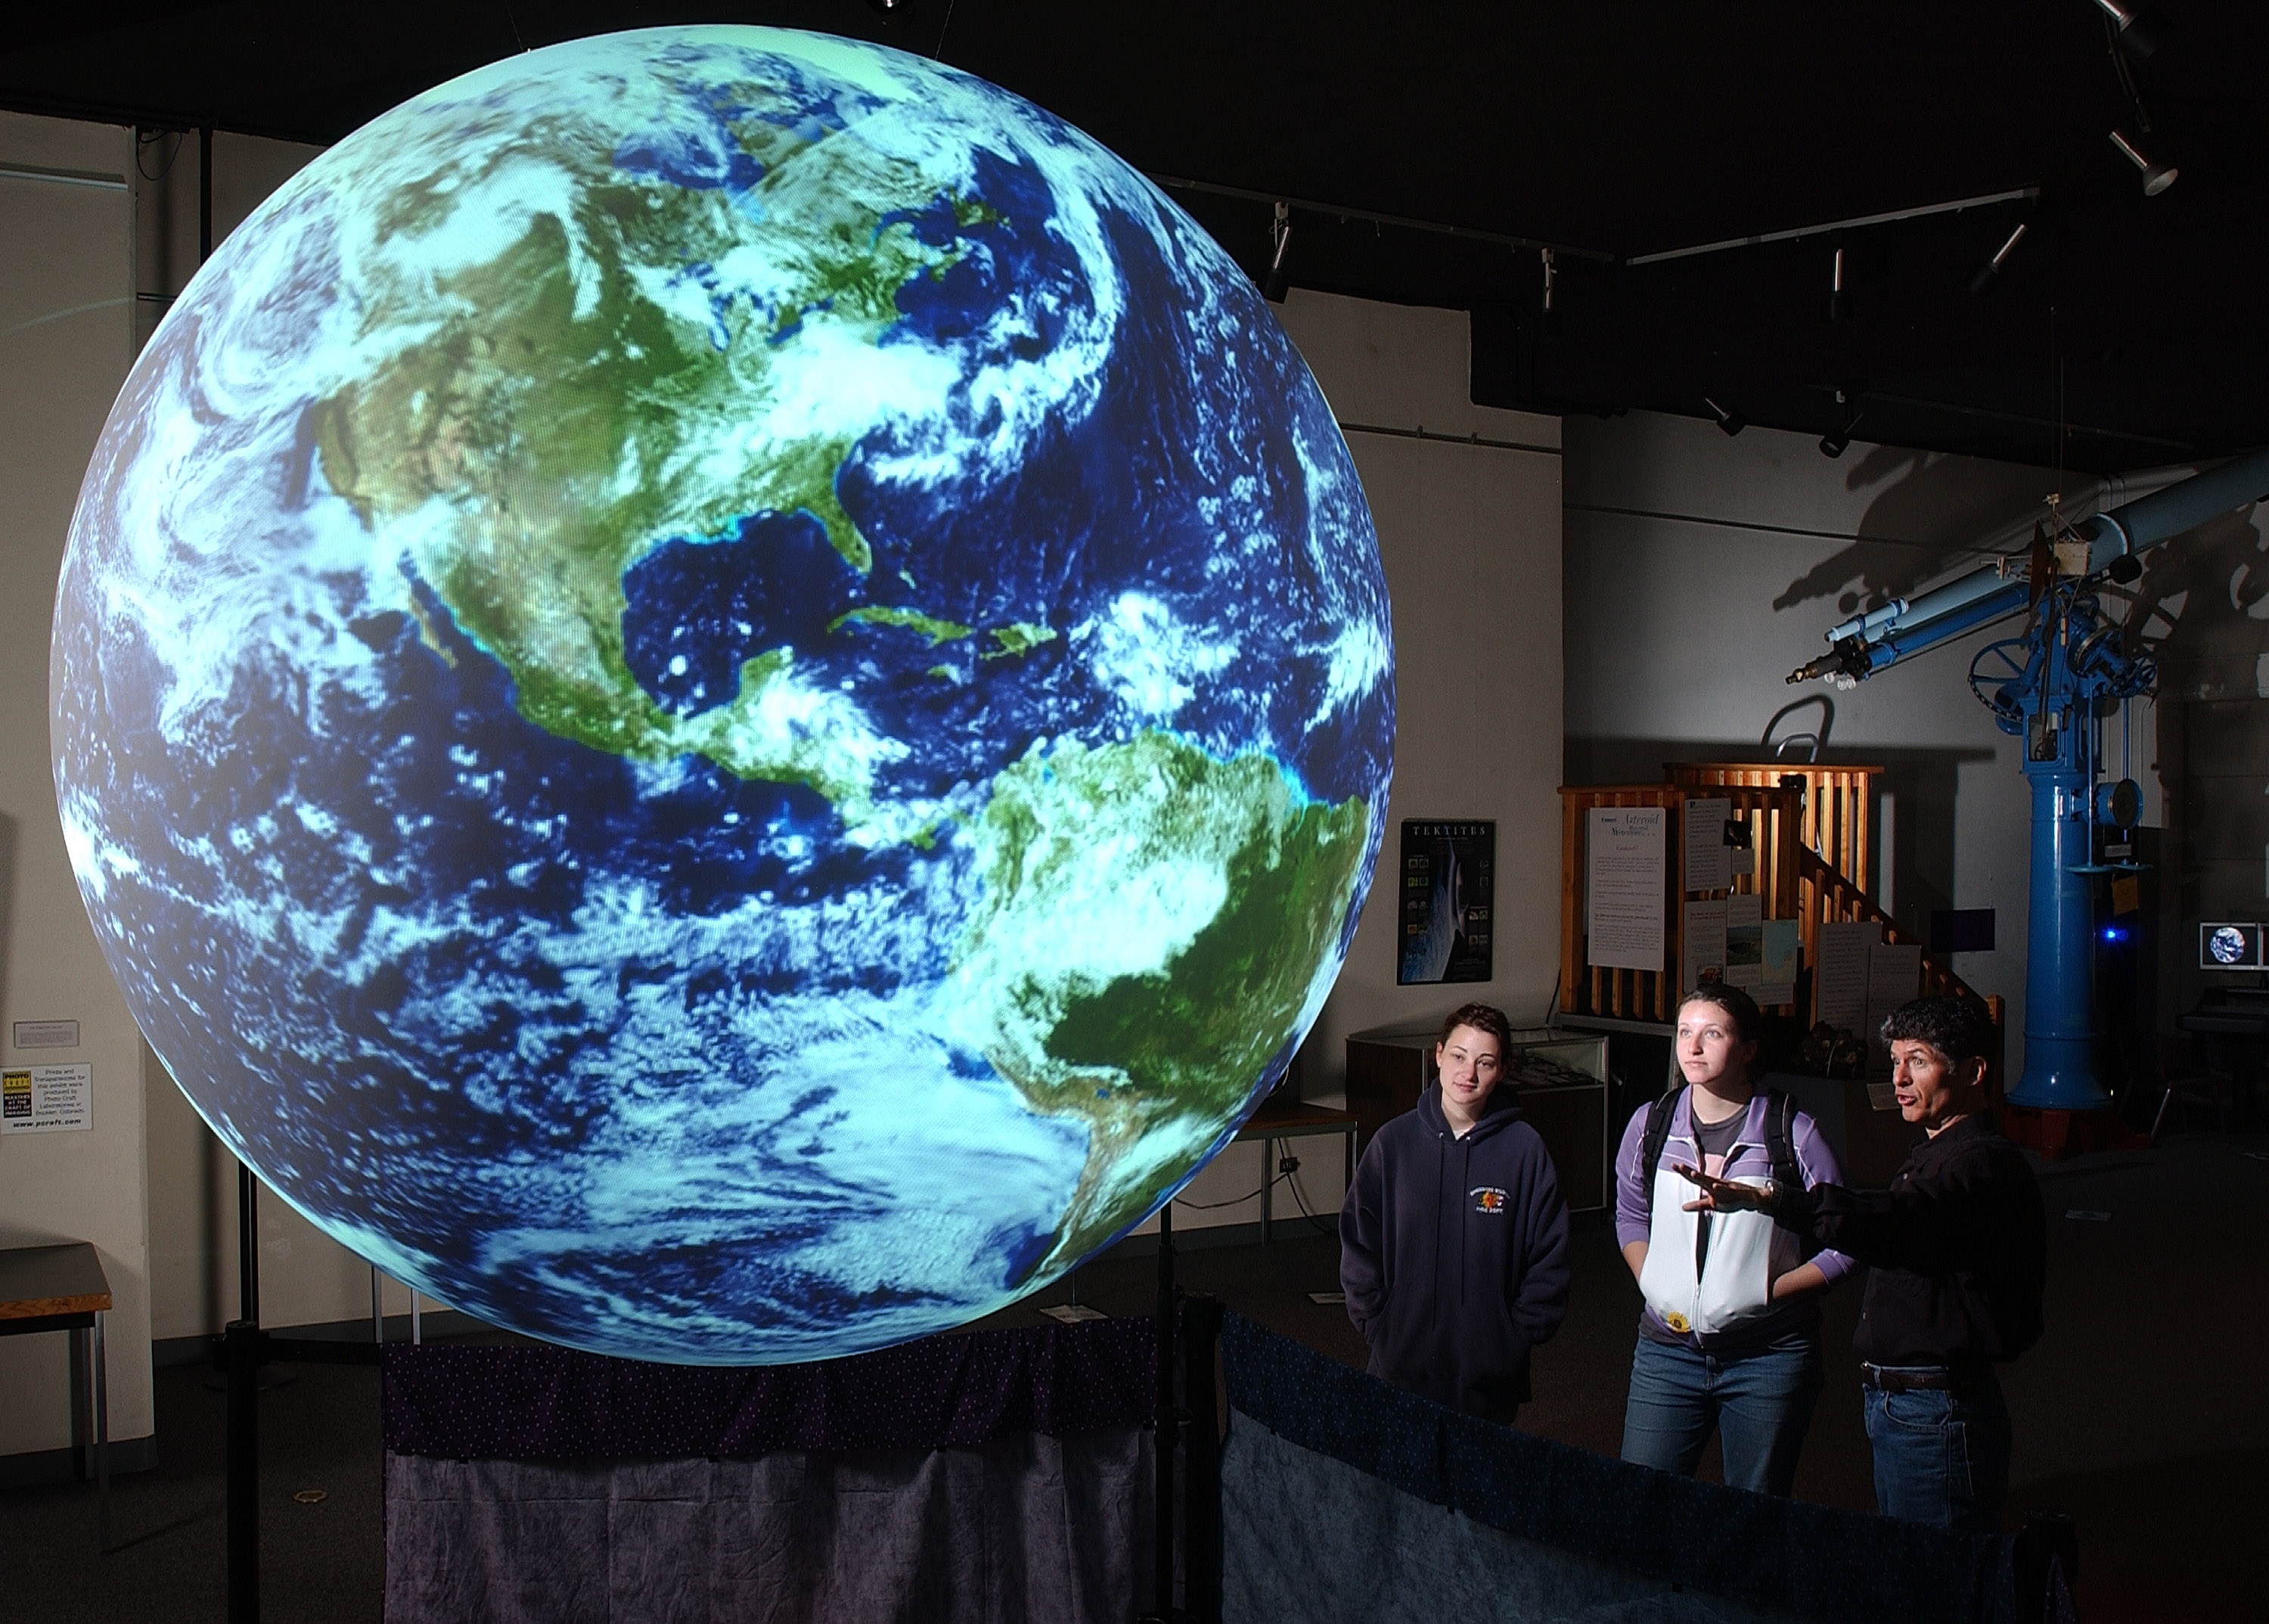 Three people stand in front of Science On a Sphere, one of them is gesturing towards the Sphere and speaking. In the background, a telescope is visible